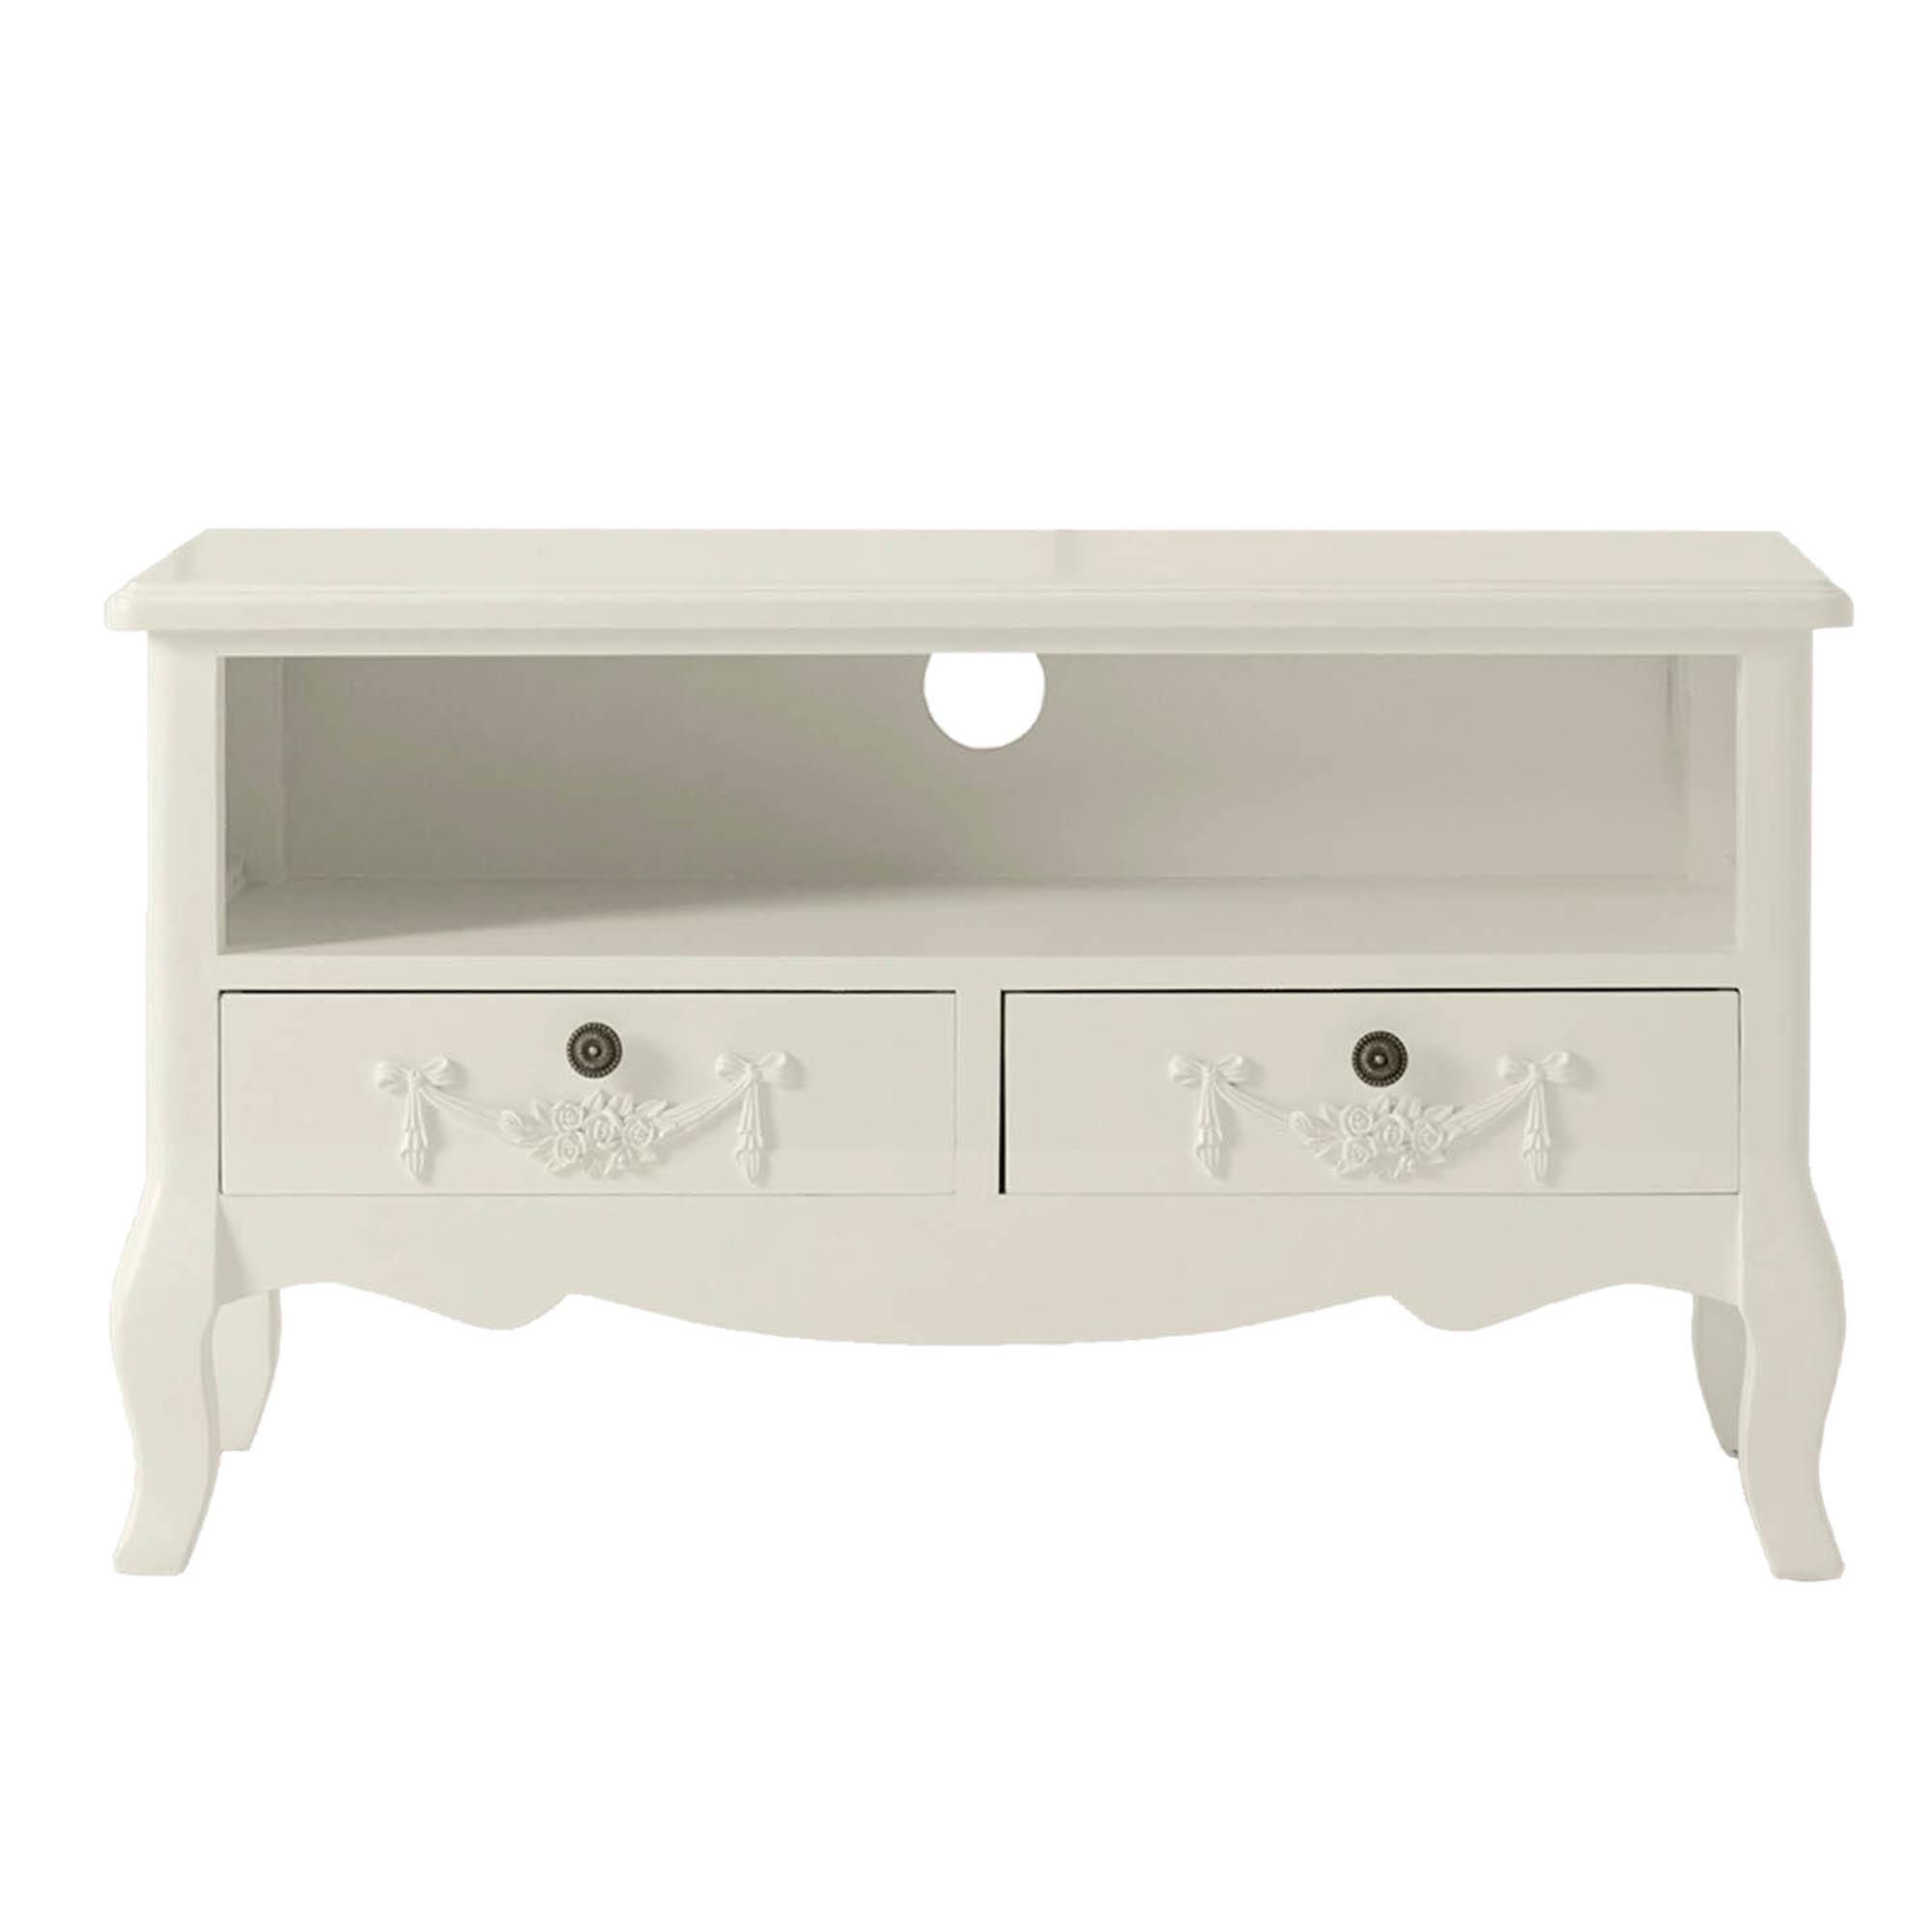 Hanna Oyster Corner Tv Stands (View 2 of 7)